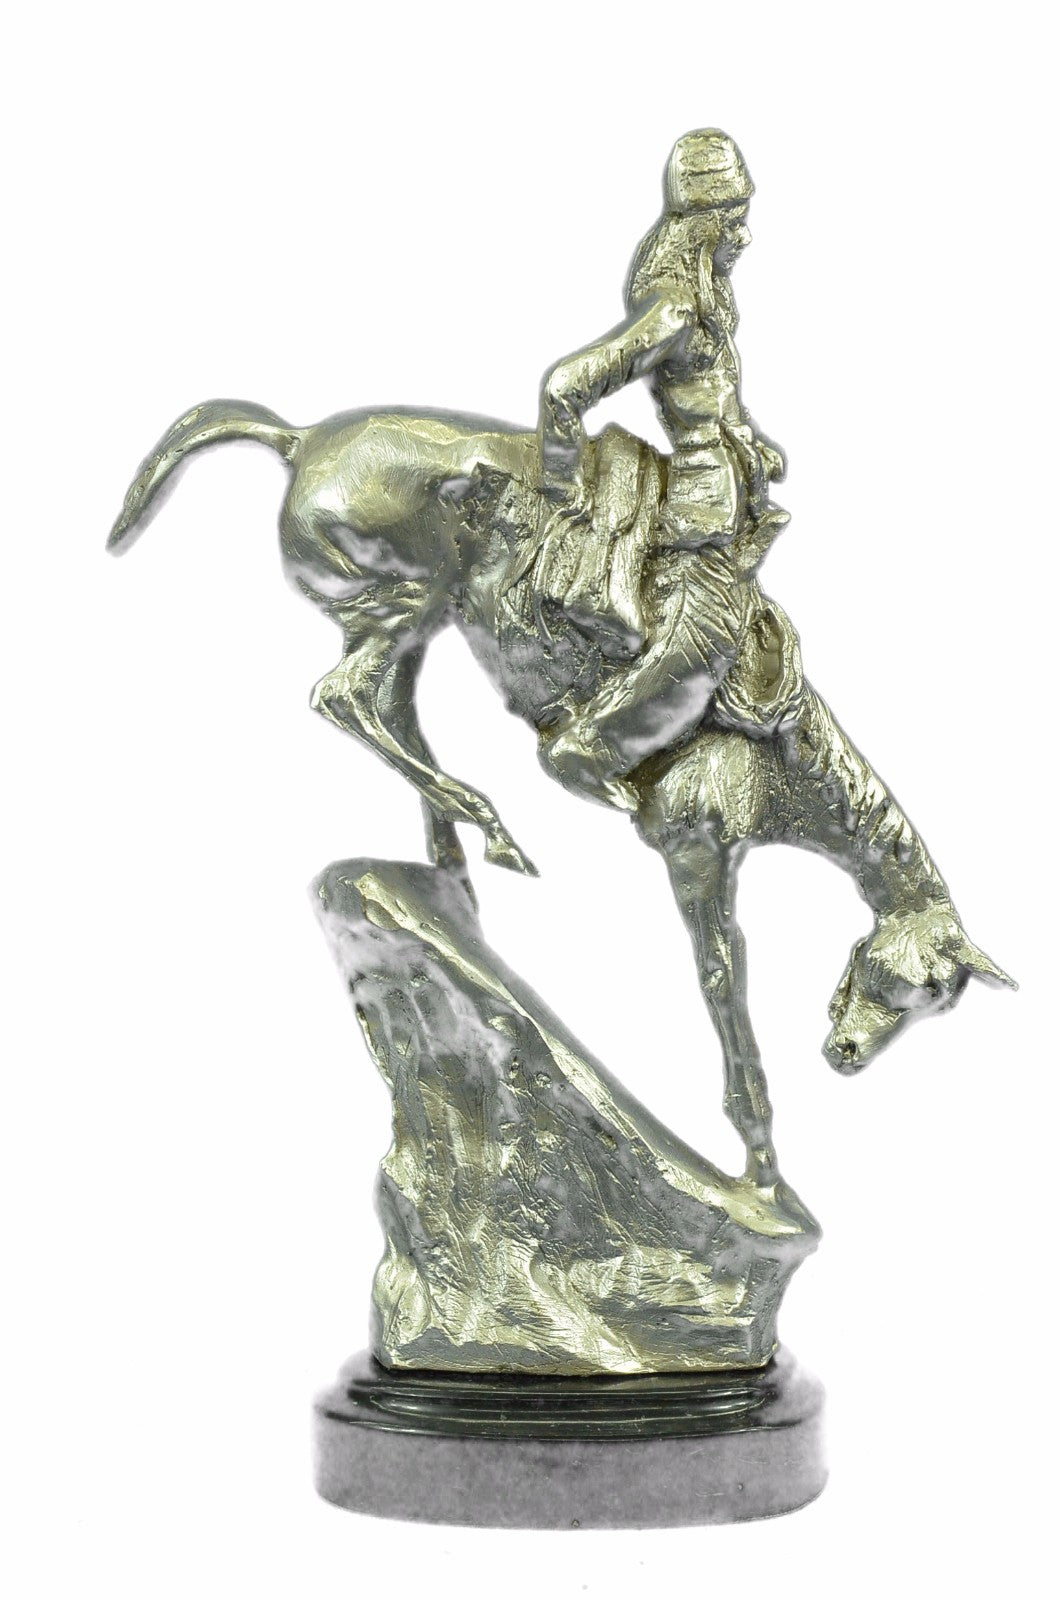 Collectible Hand Crafted American Indian Chief on Horse Bronze Sculpture Statue